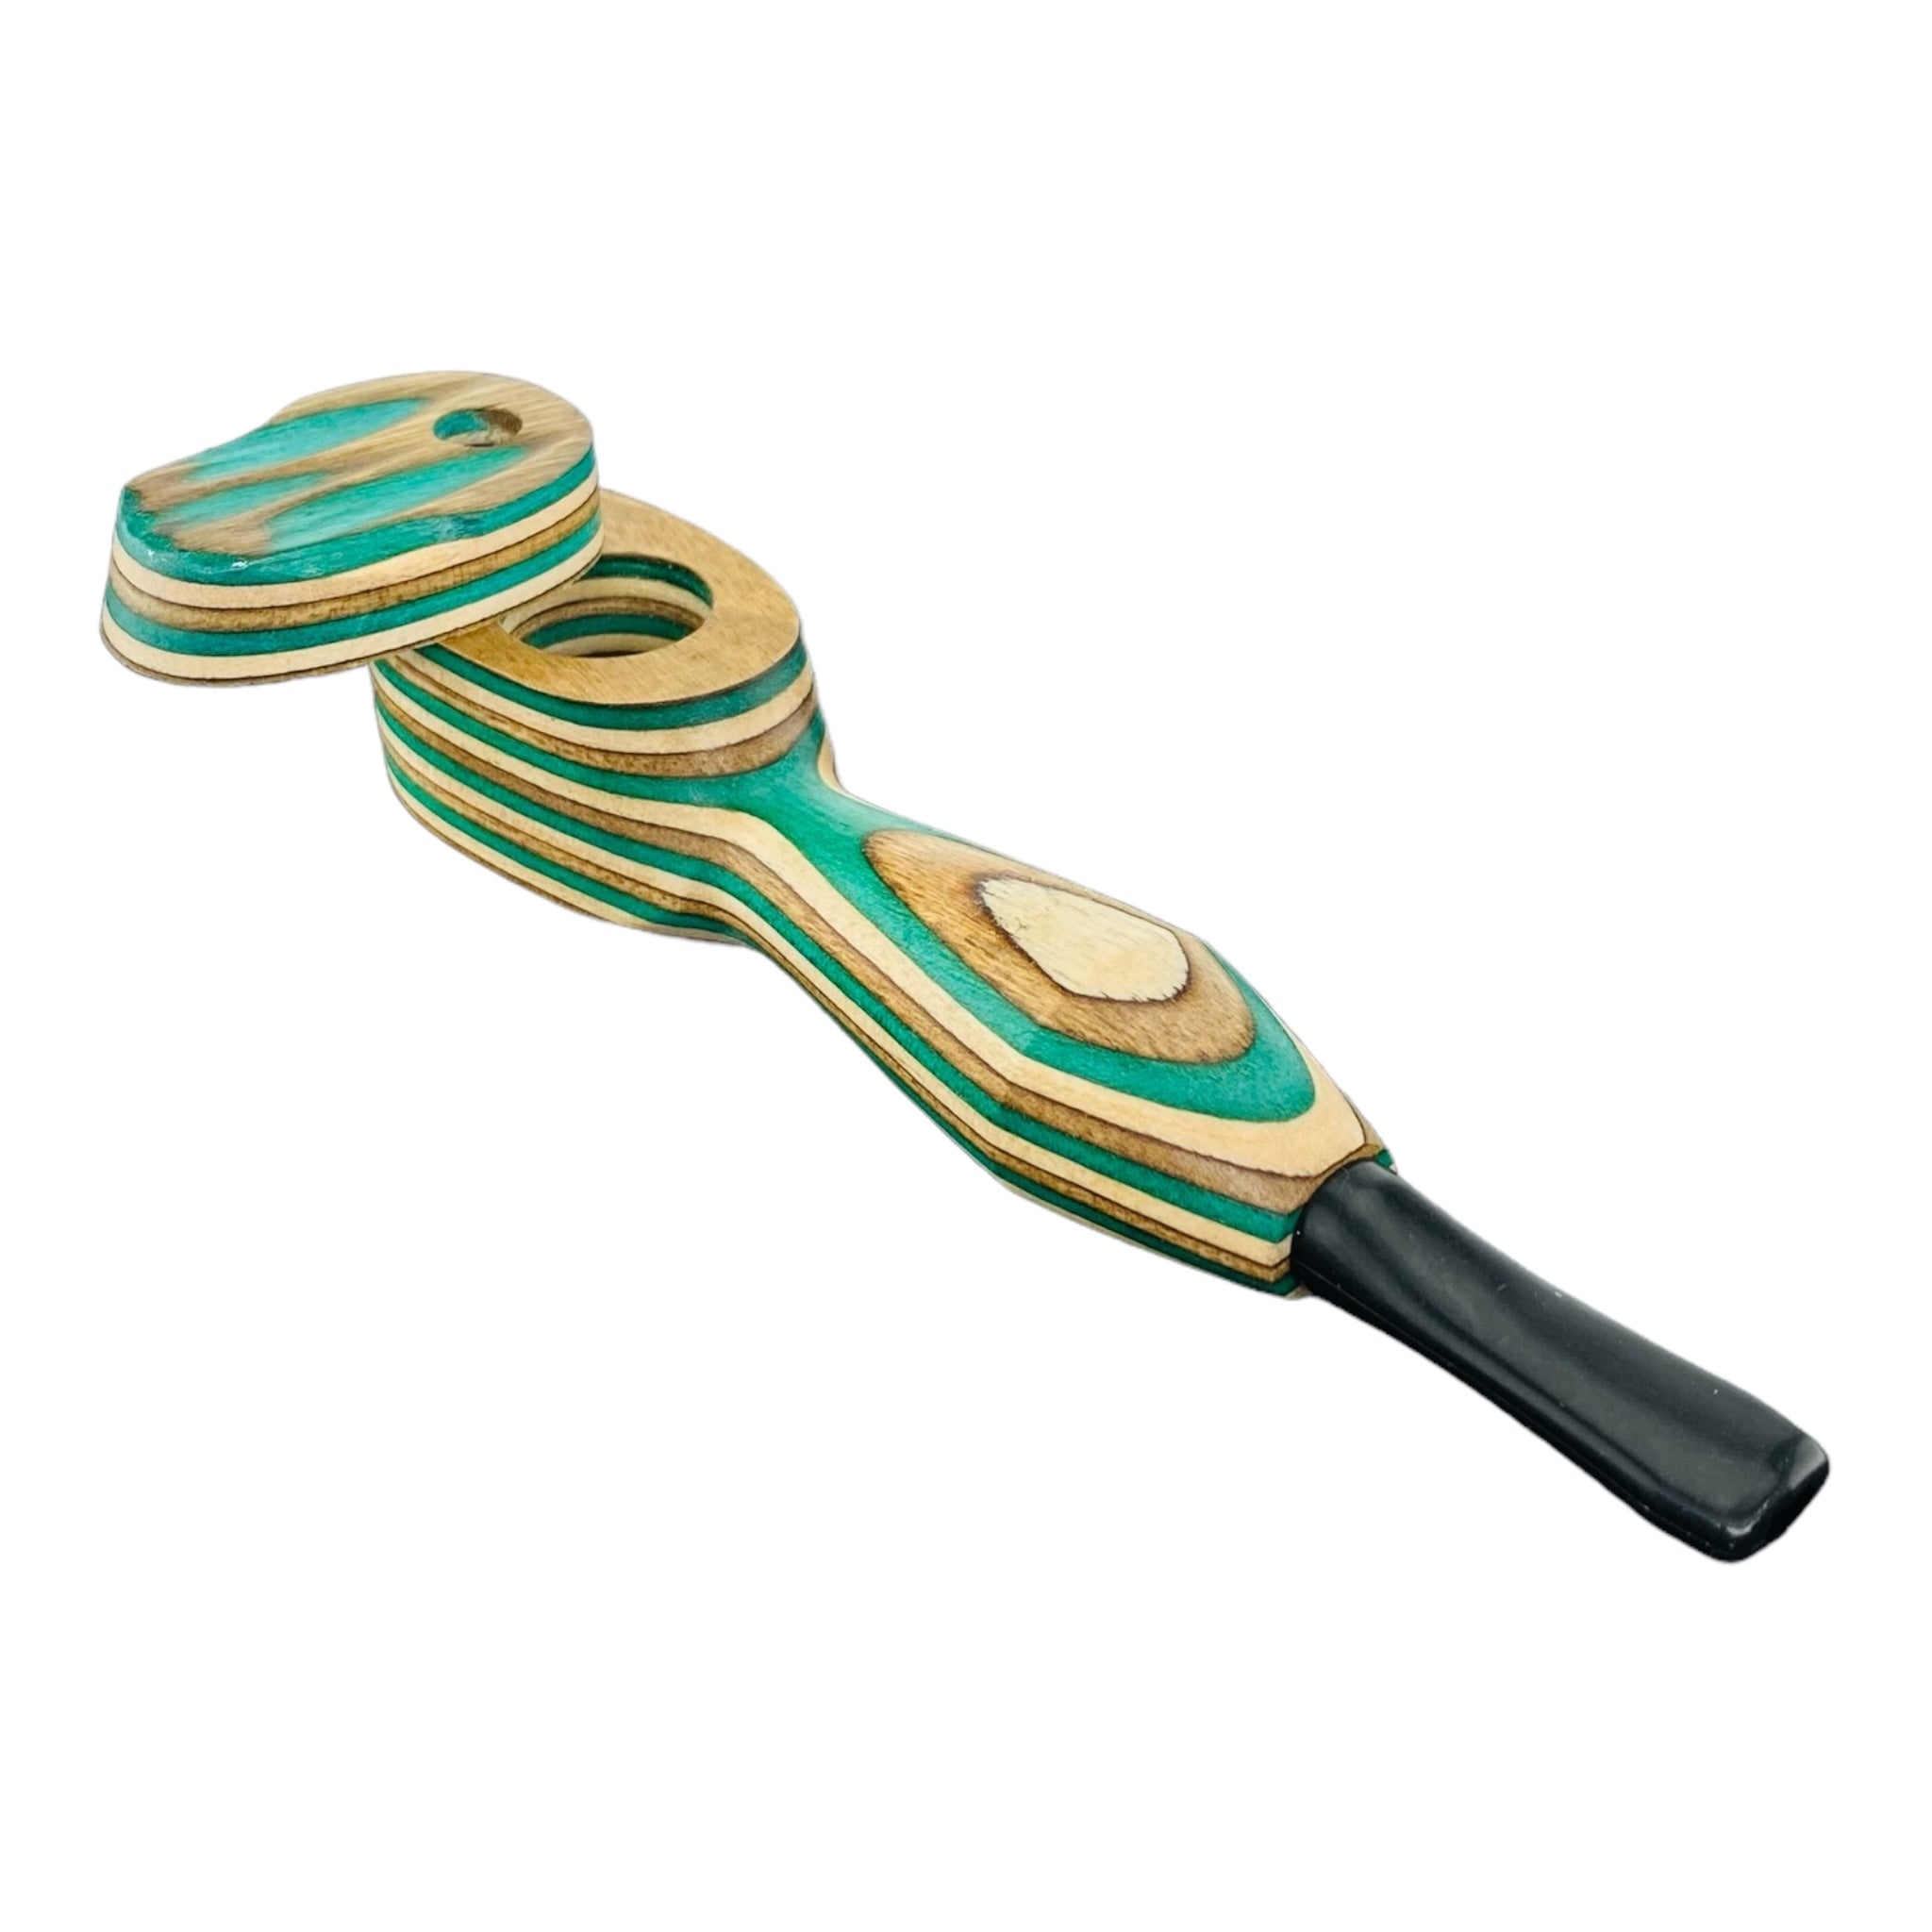 Wood Hand Pipe - Multi Colored Wood Pipe With Plastic Mouthpiece for weed or tobacco